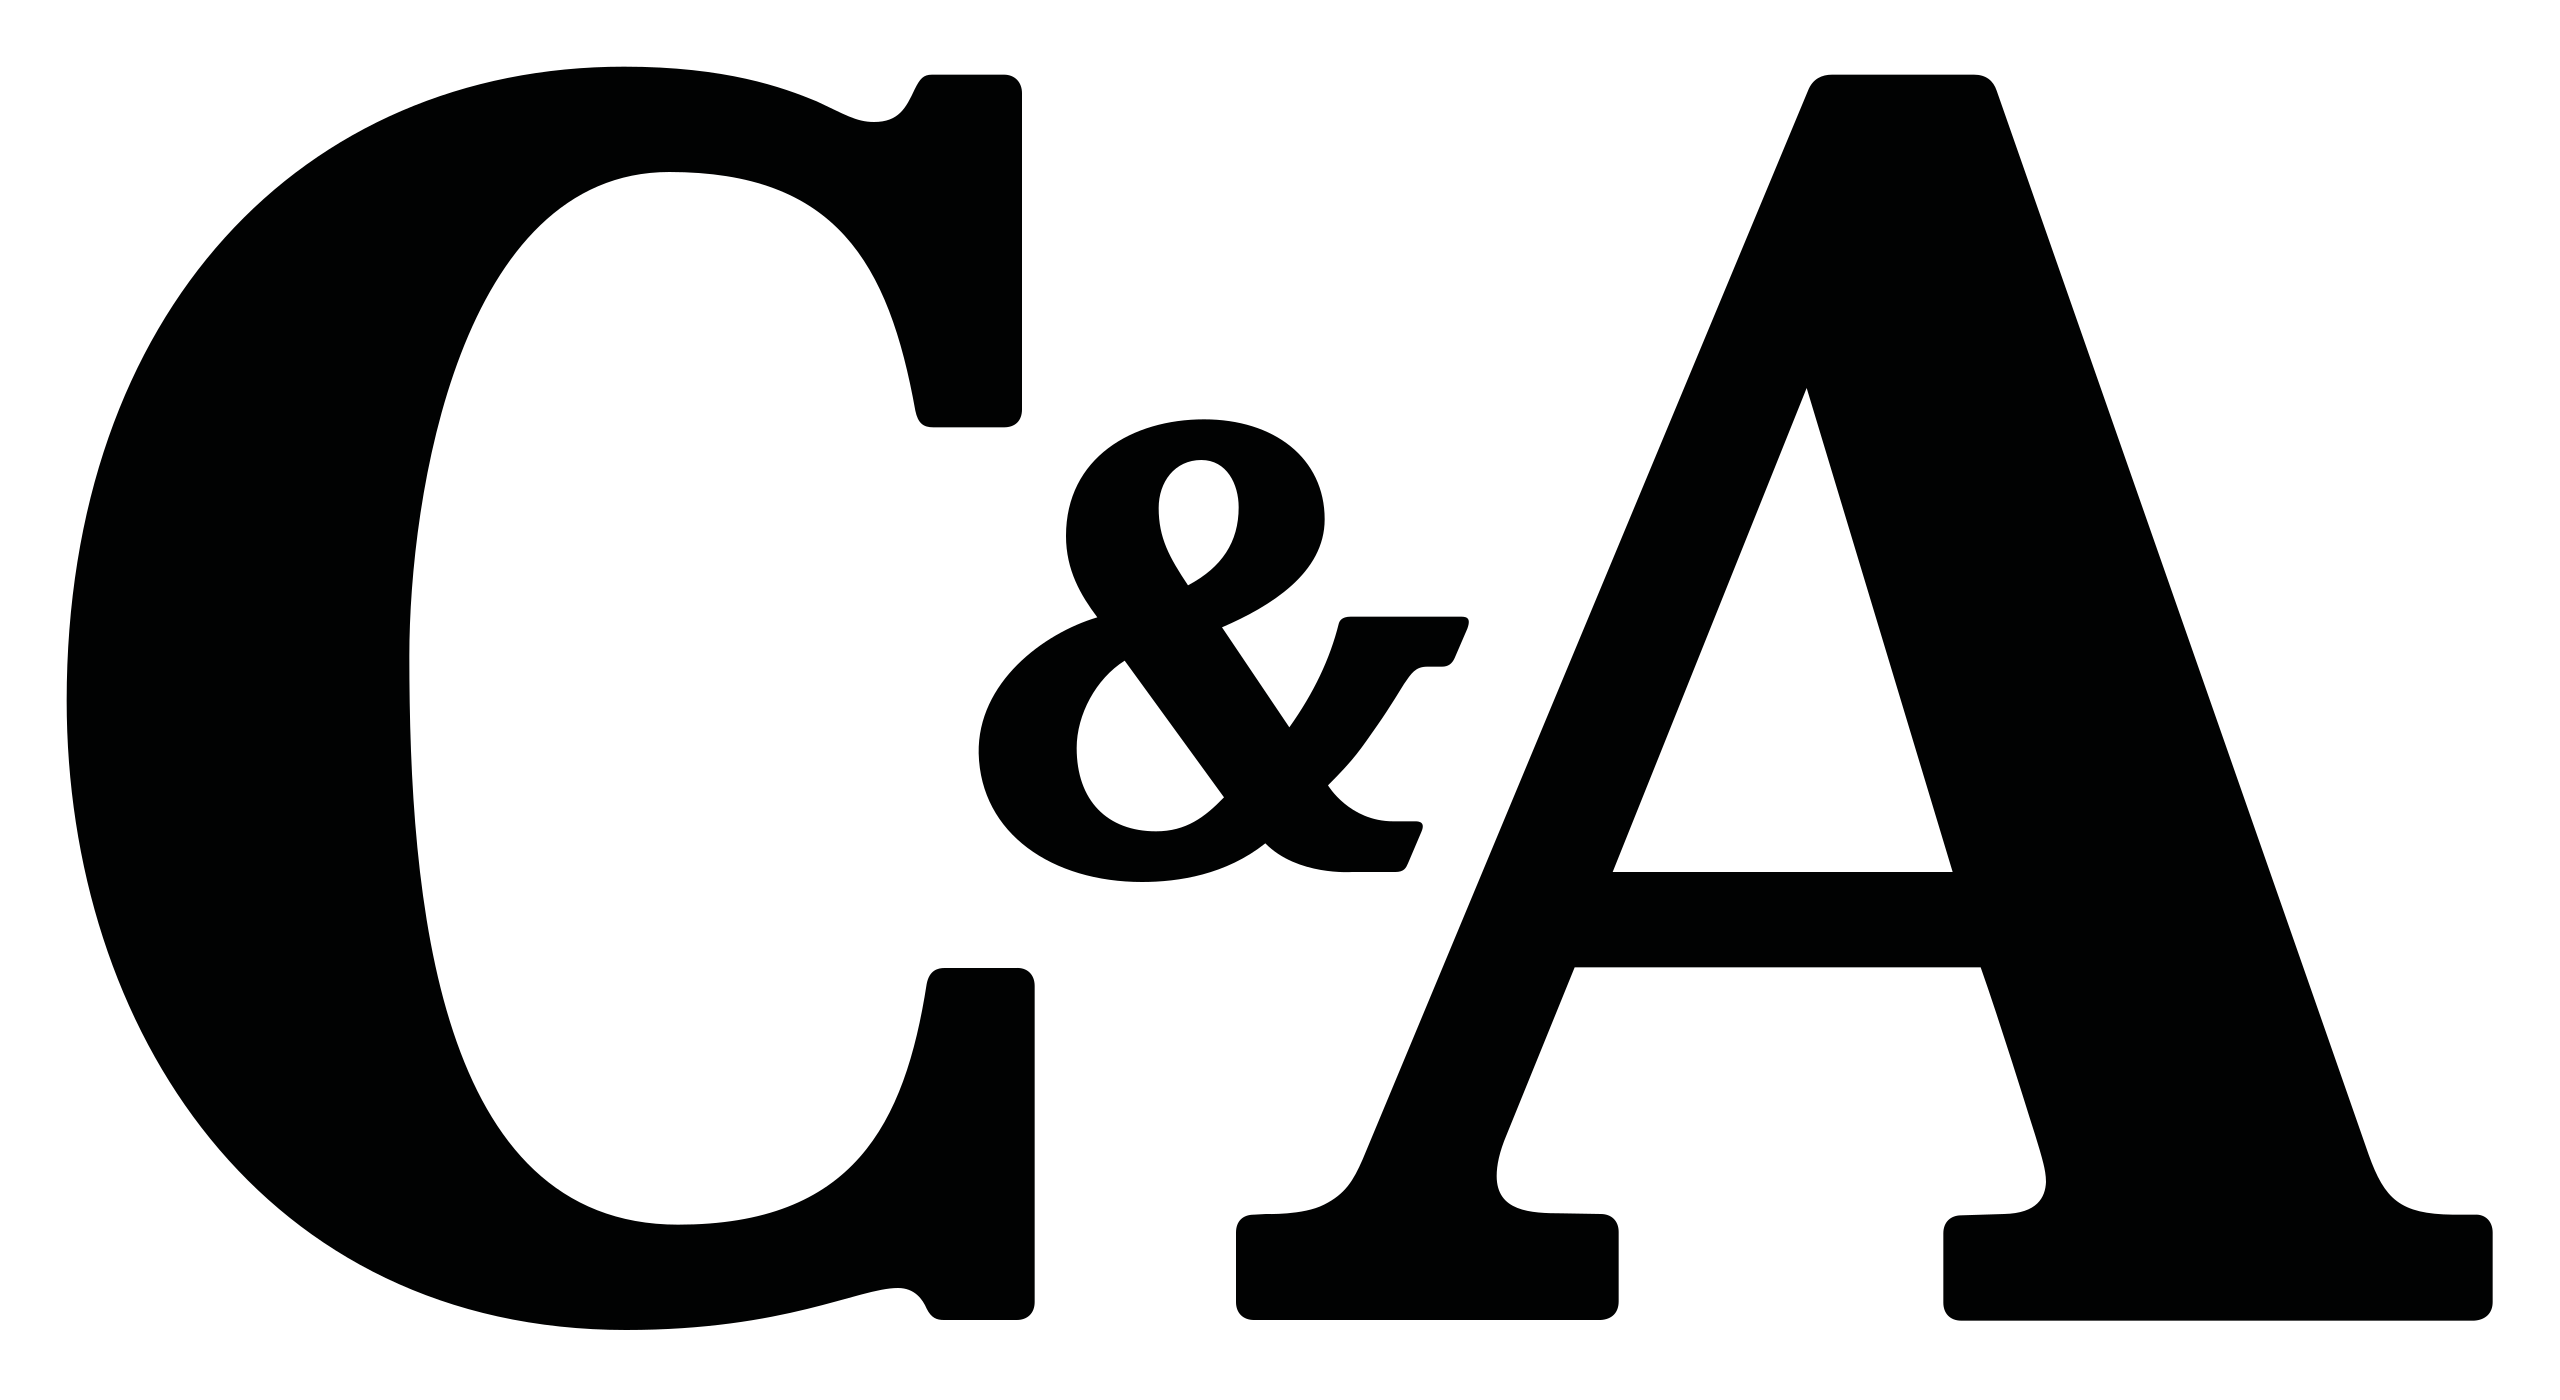 c-and-a-logo